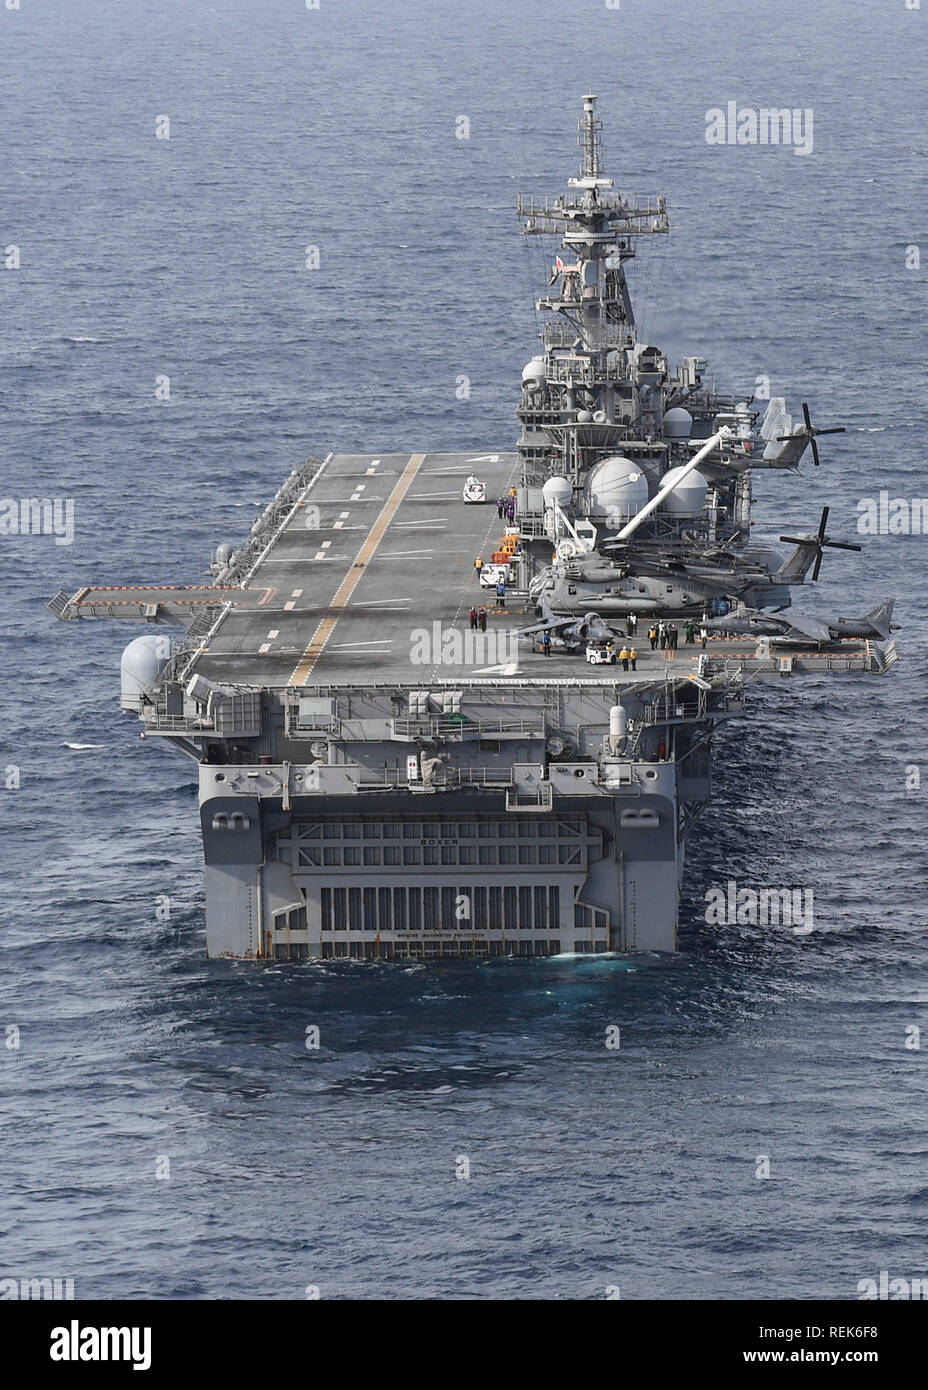 190120-N-PM193-1192   PACIFIC OCEAN (Jan. 20, 2019) Amphibious assault ship USS Boxer (LHD 4) transits the eastern Pacific Ocean. Boxer is underway while conducting routine operations as a part of USS Boxer Amphibious Ready Group (ARG). (U.S. Navy photo by Mass Communication Specialist 3rd Class Alexander C. Kubitza) Stock Photo